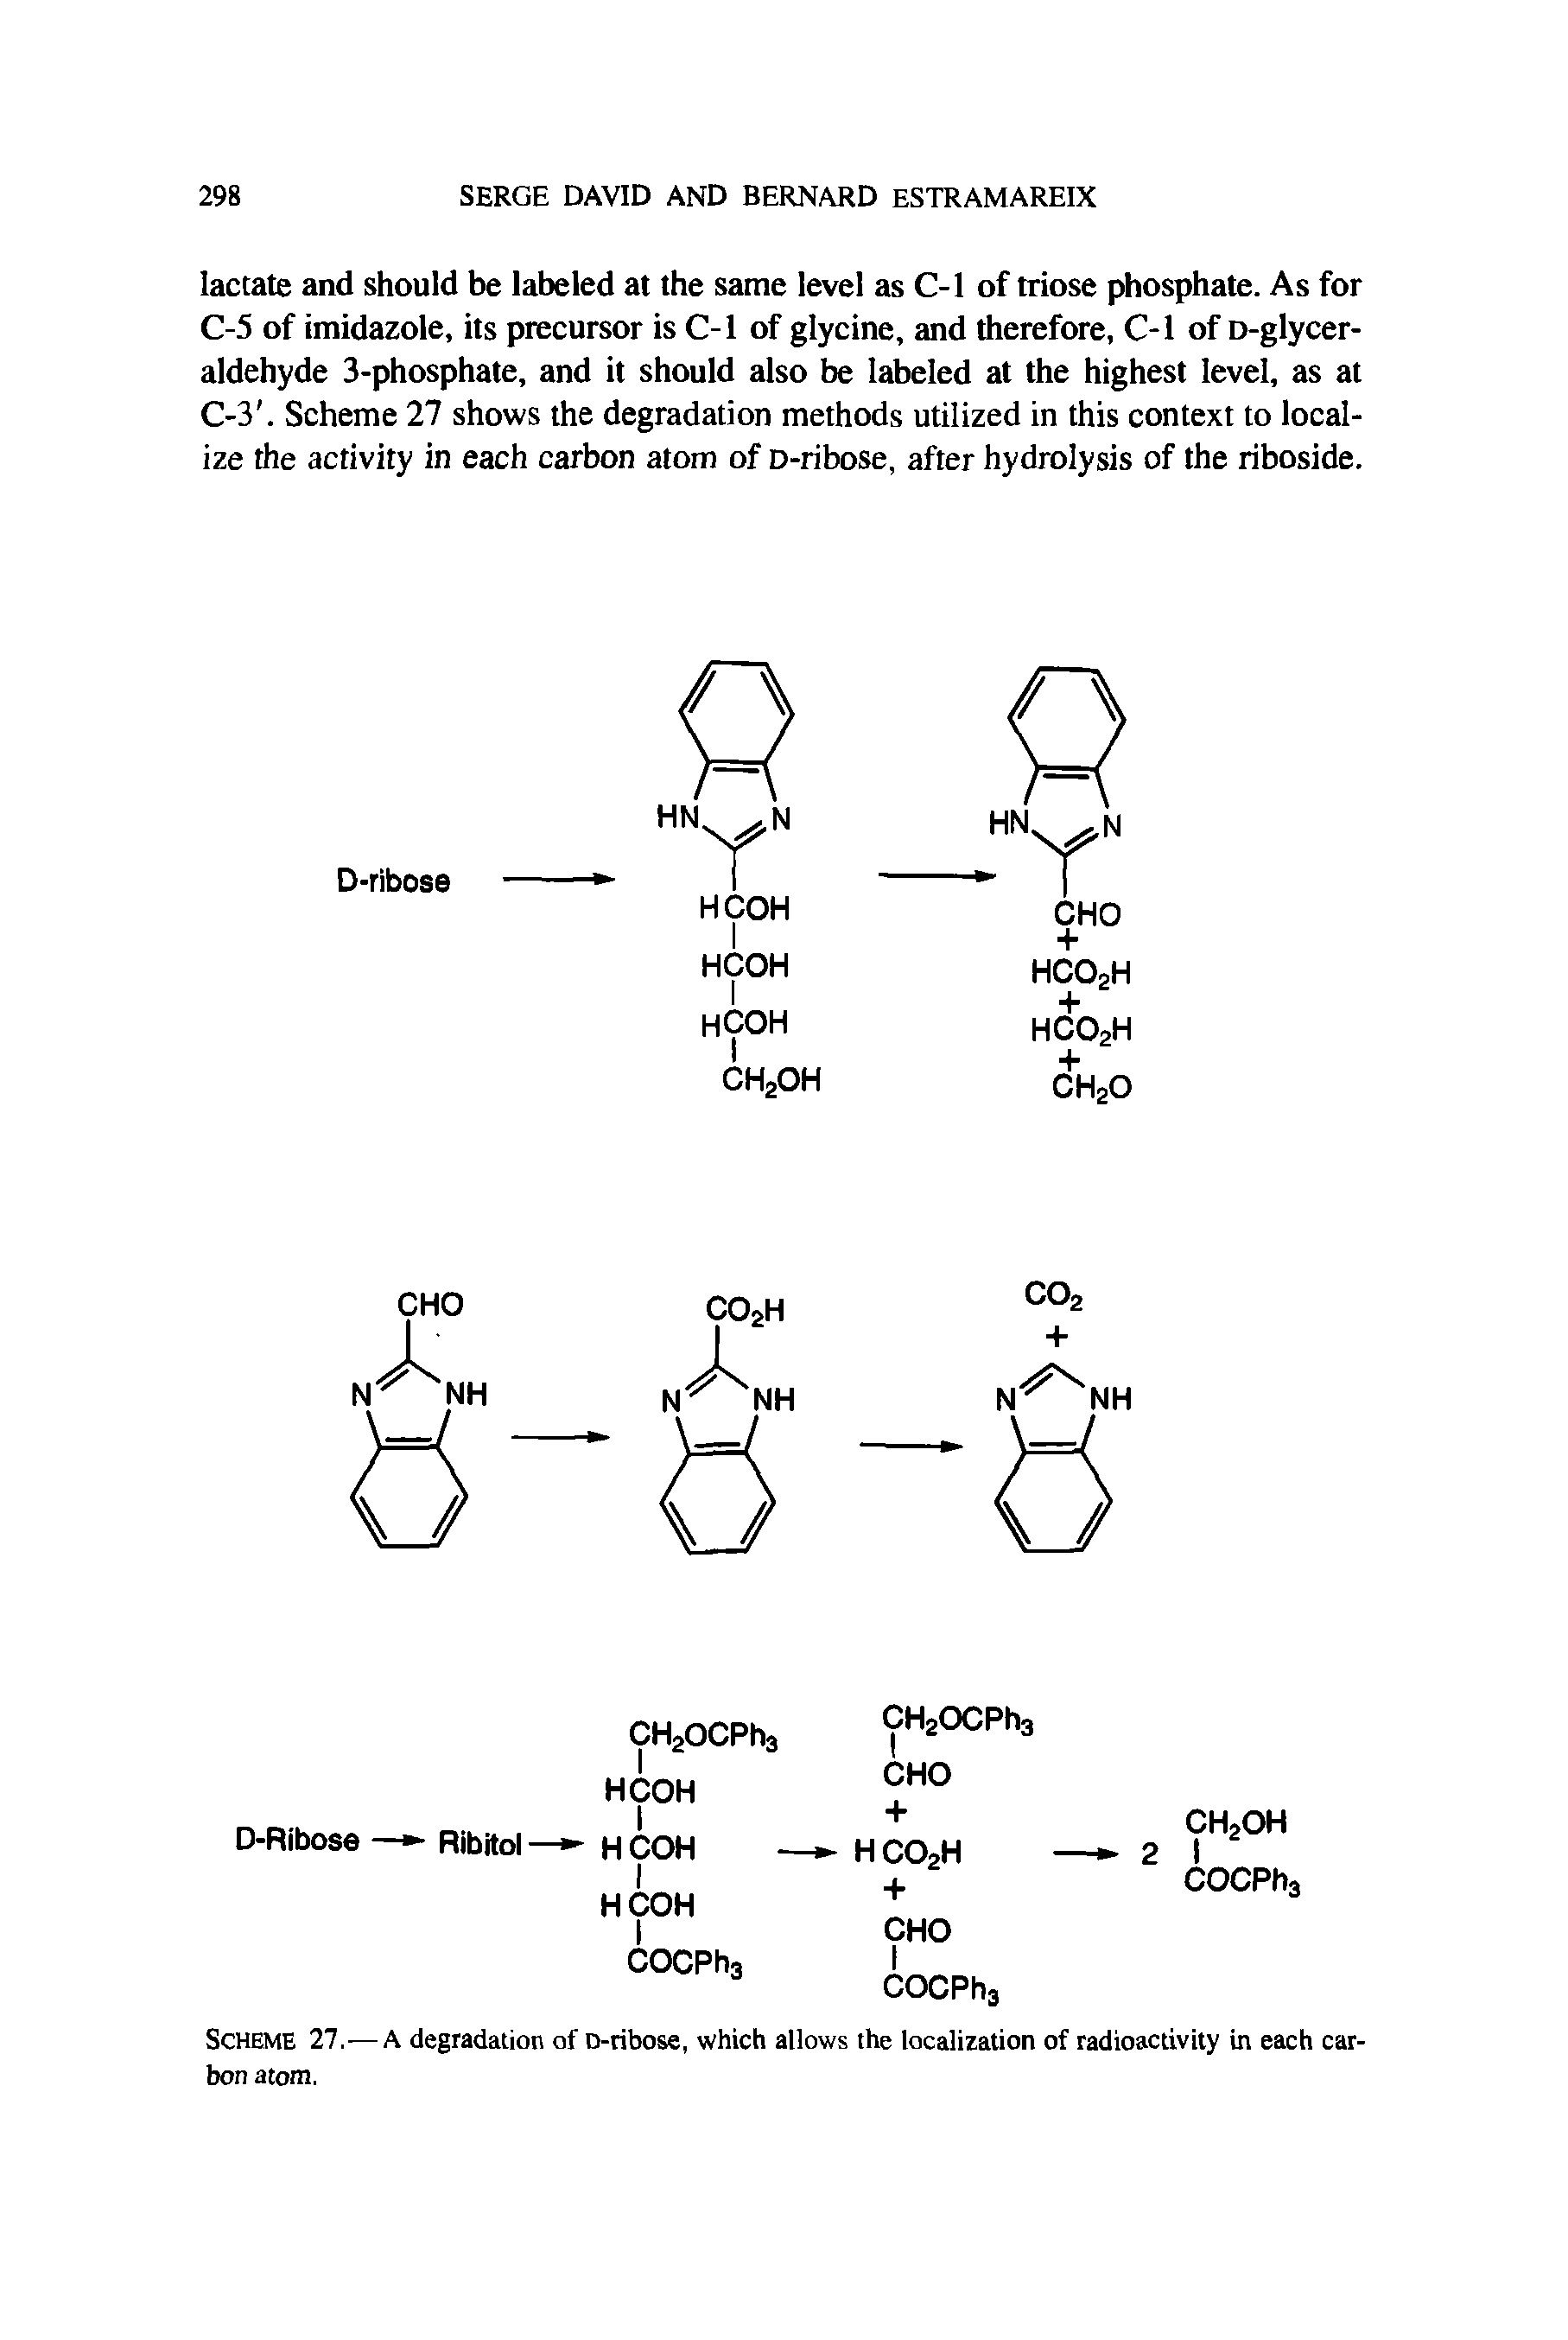 Scheme 27.—A degradation of D-ribose, which allows the localization of radioactivity in each carbon atom.